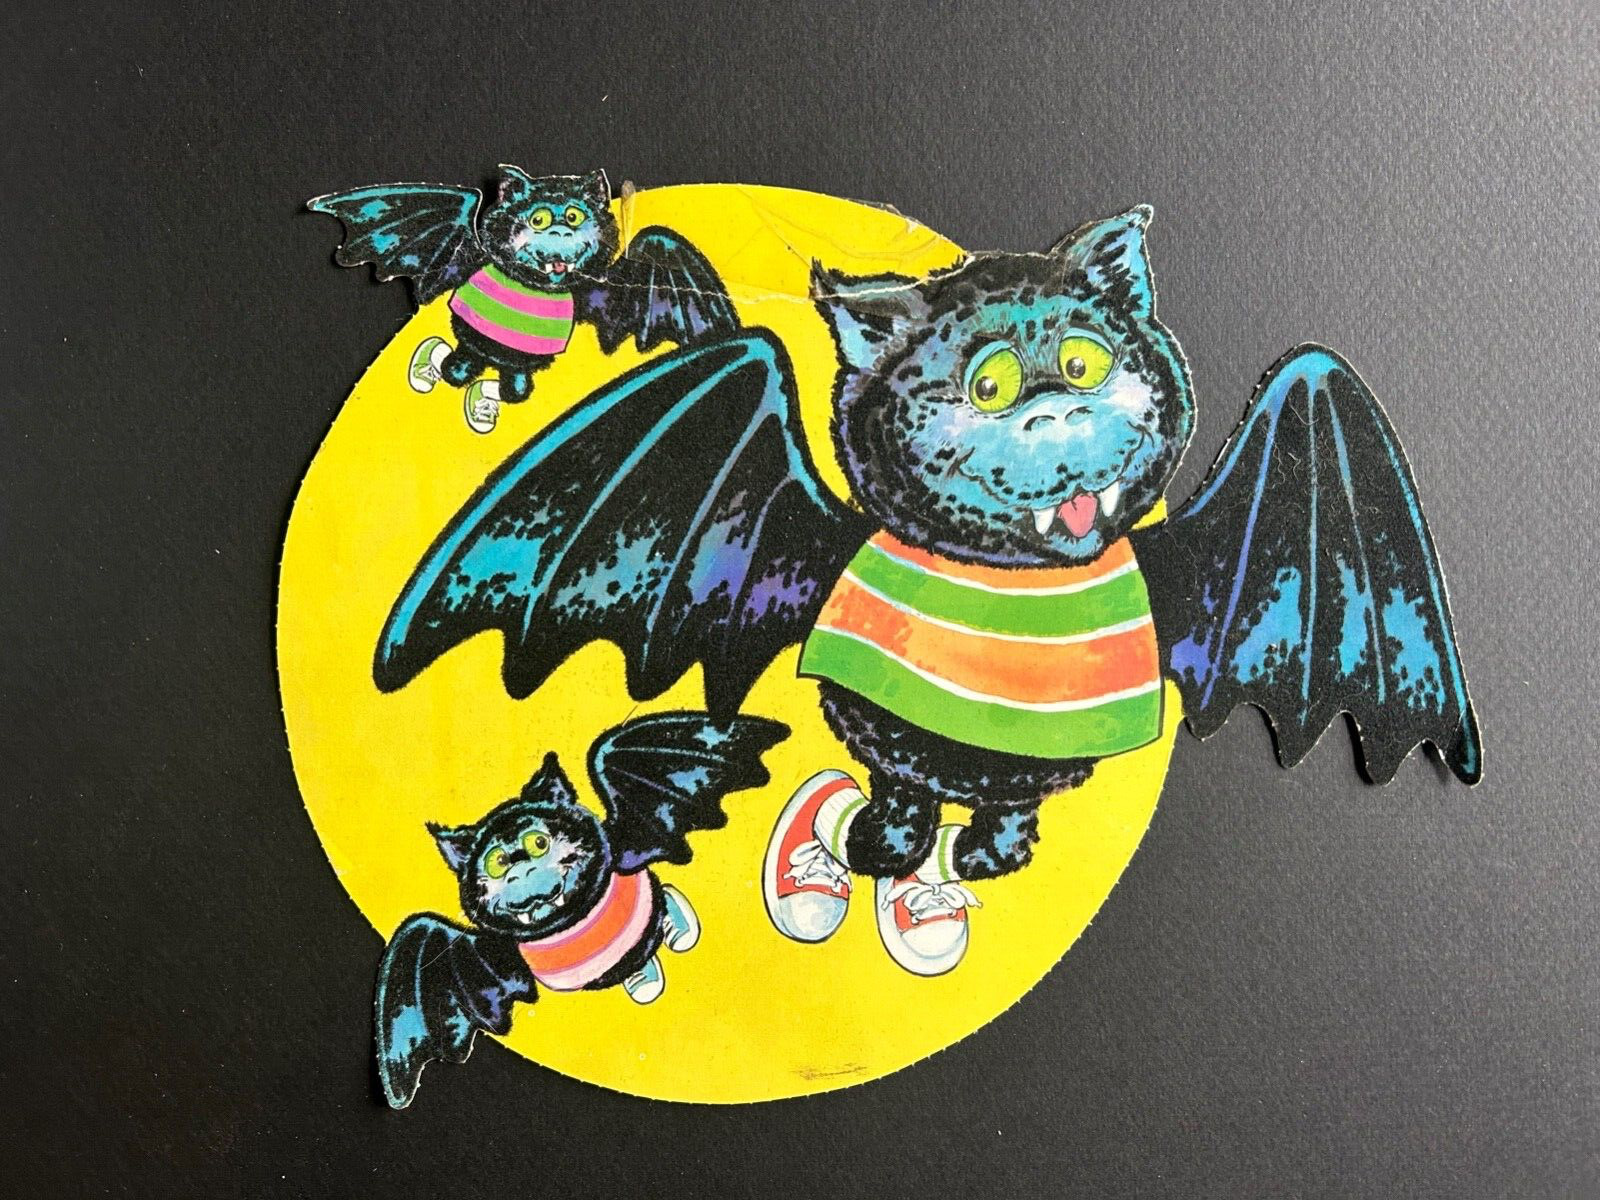 Vintage Halloween Decoration: 3 Bats Flying in the Moon